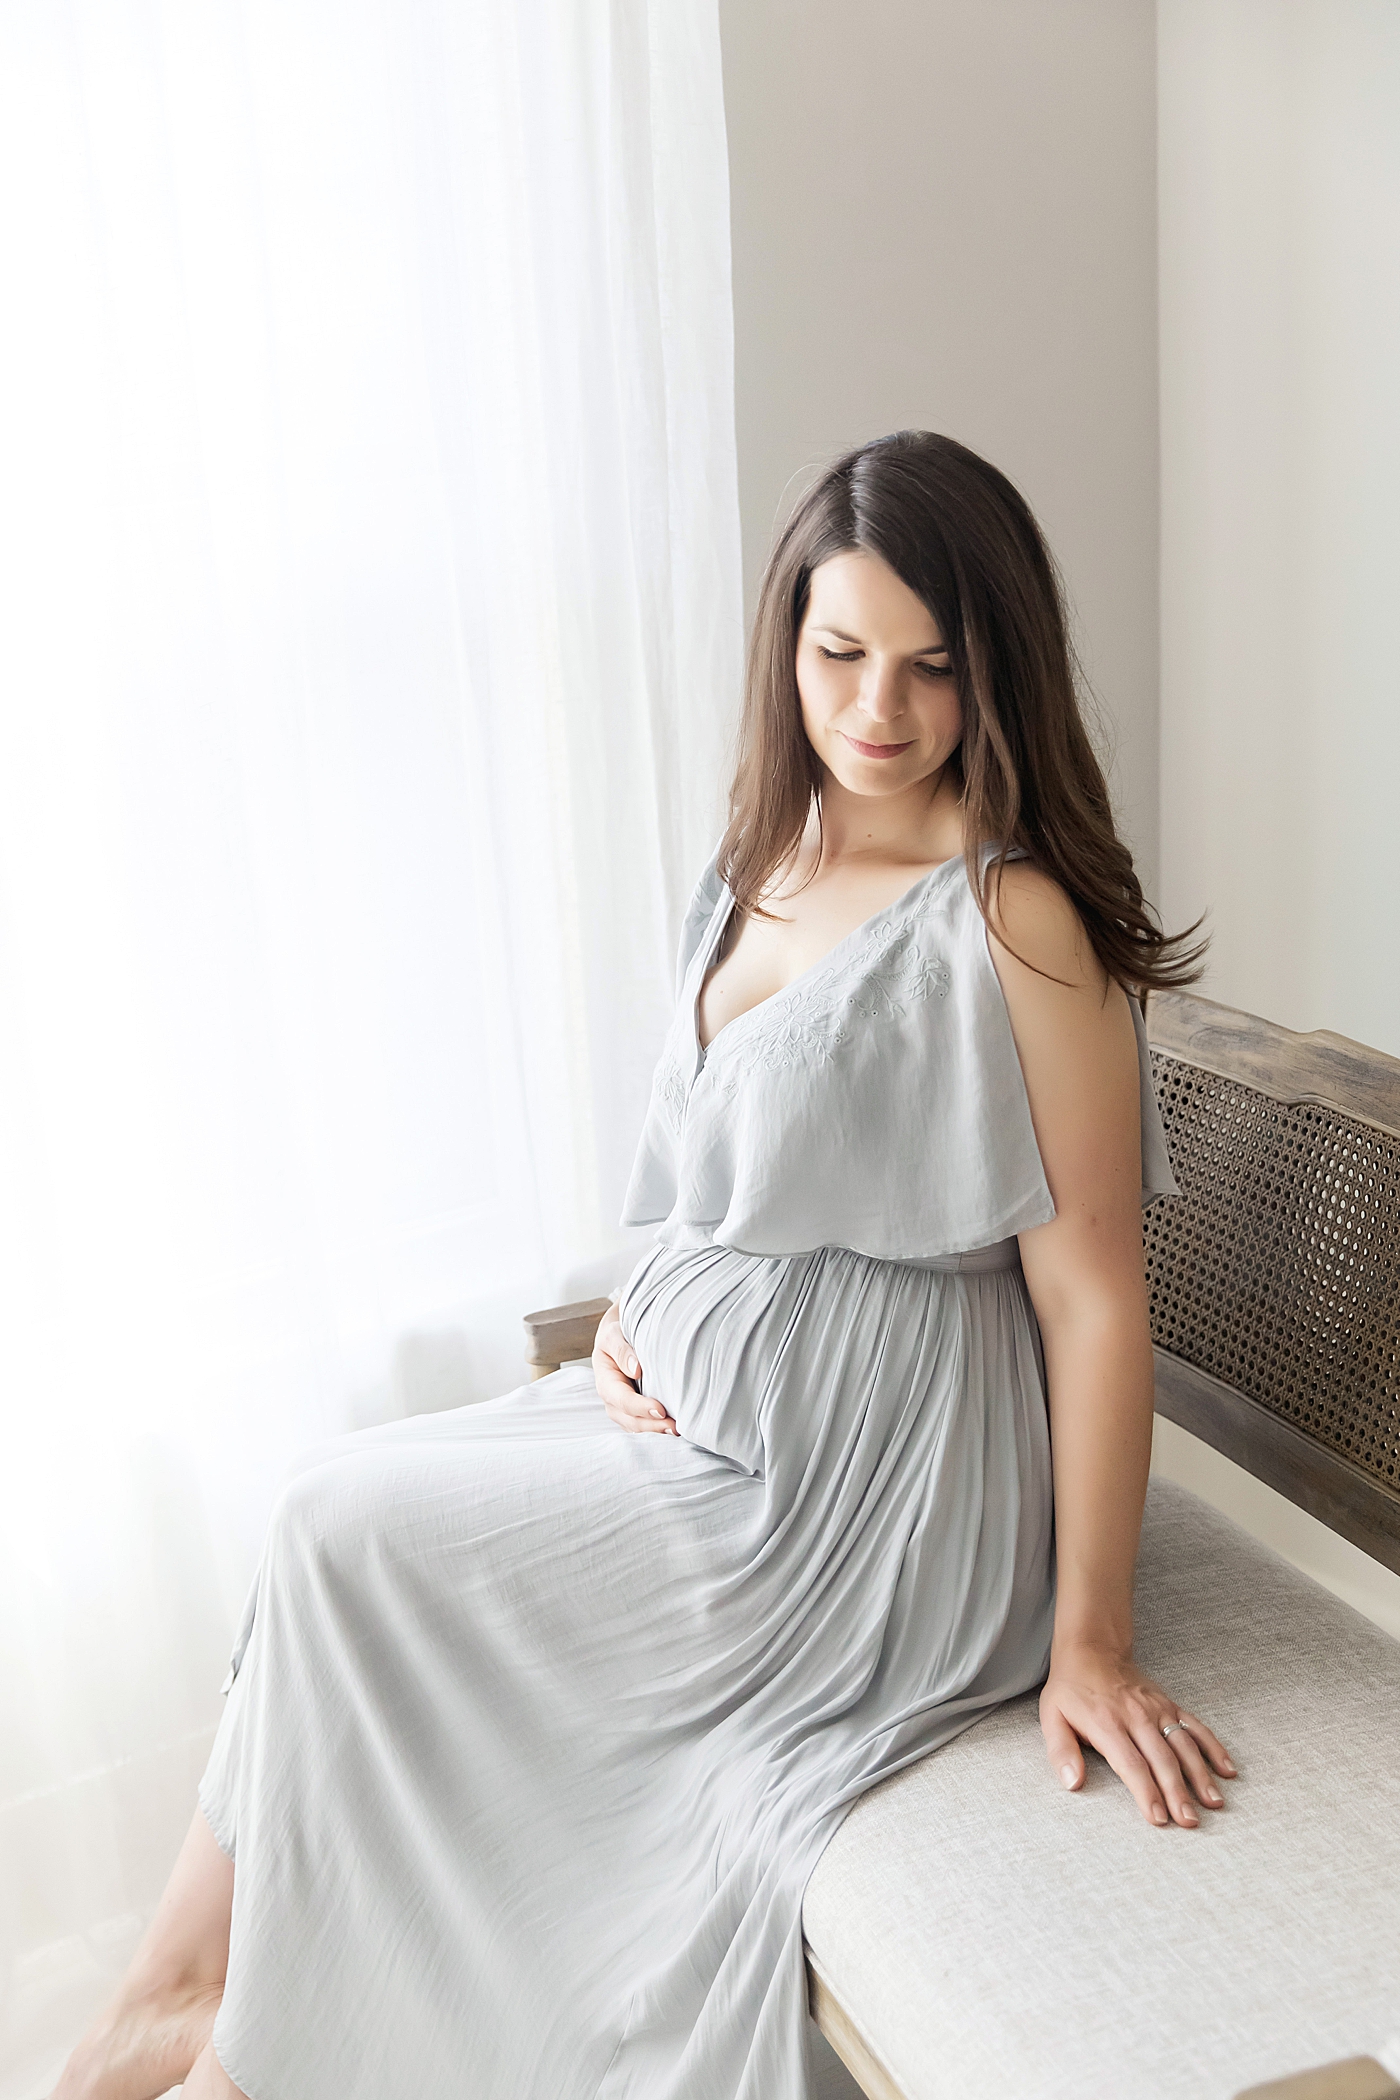 Maternity session in a studio in Houston. Photos by Fresh Light Photography.